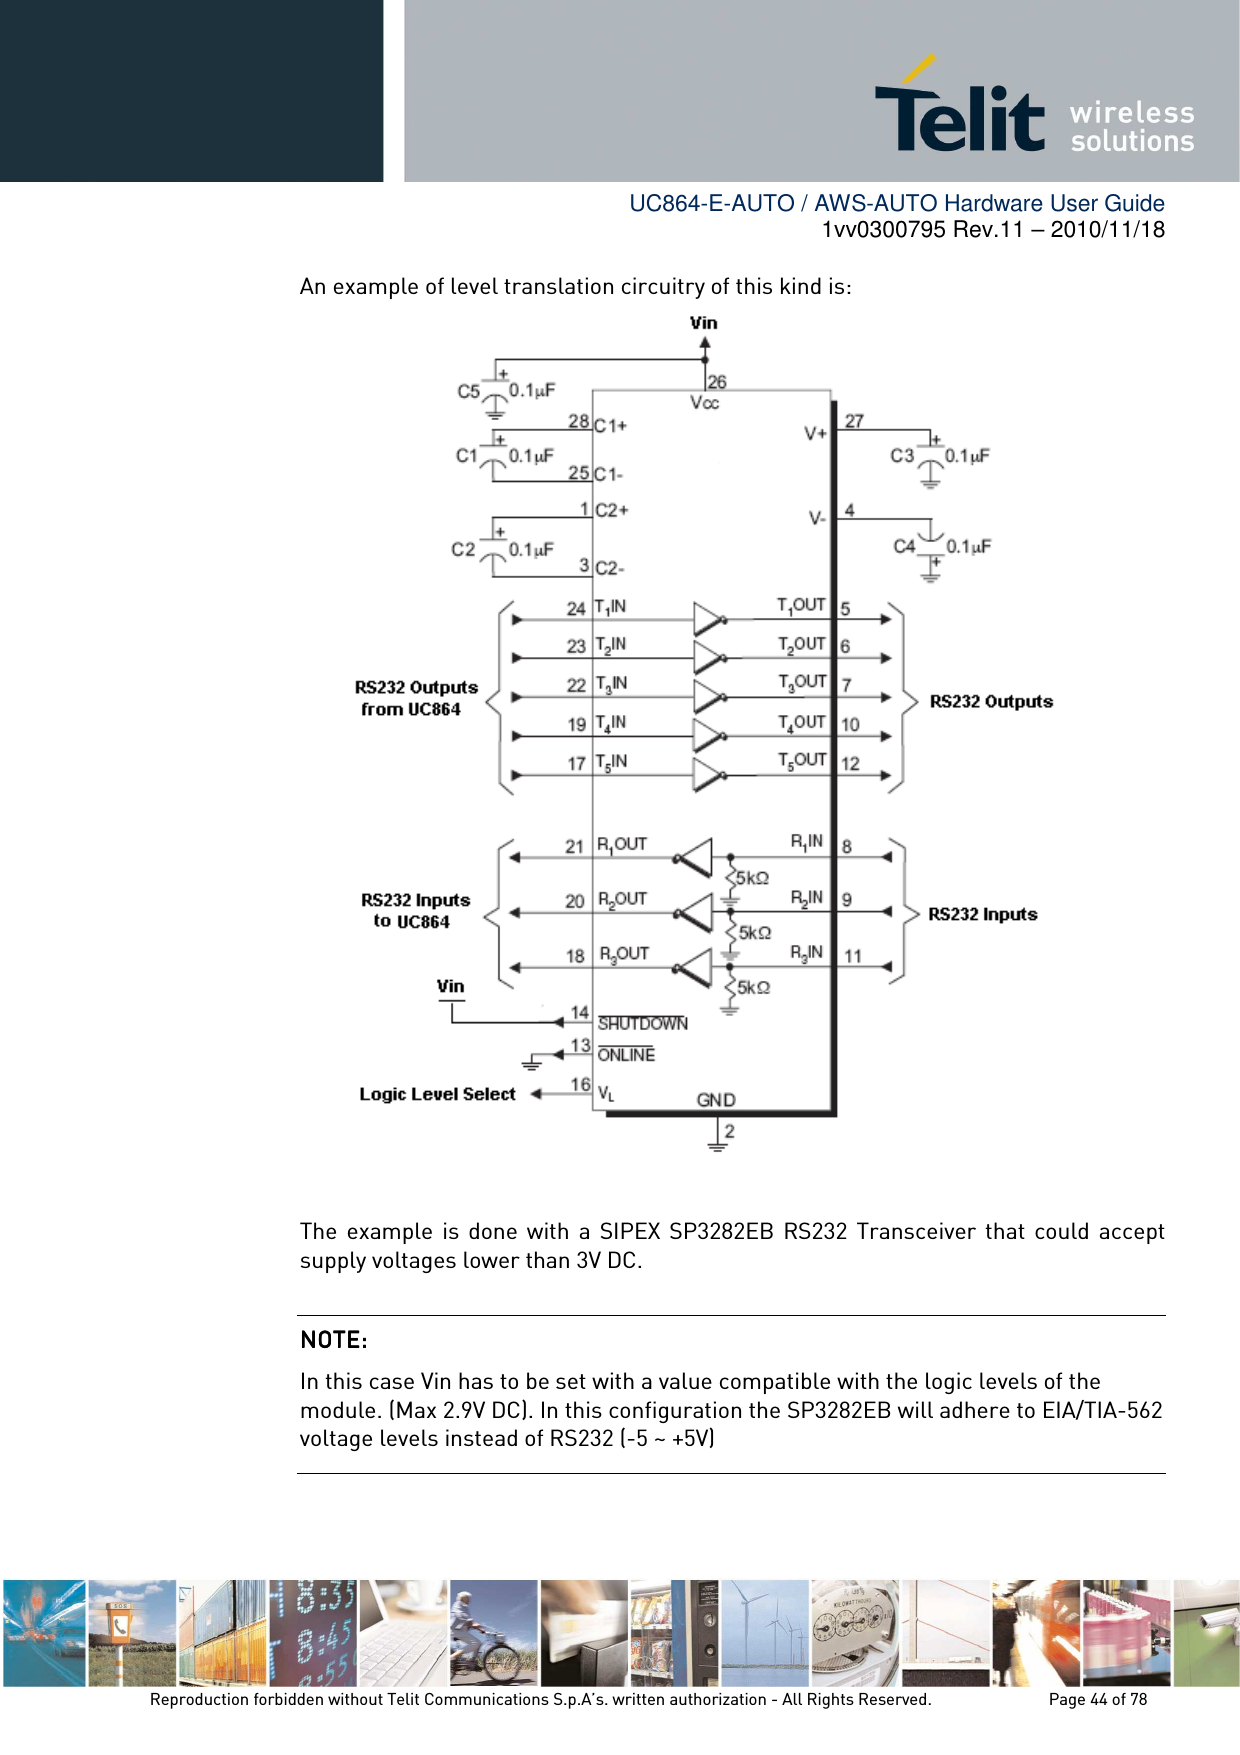        UC864-E-AUTO / AWS-AUTO Hardware User Guide 1vv0300795 Rev.11 – 2010/11/18     Reproduction forbidden without Telit Communications S.p.A’s. written authorization - All Rights Reserved.    Page 44 of 78  An example of level translation circuitry of this kind is:   The  example  is  done  with  a SIPEX SP3282EB  RS232  Transceiver  that  could  accept supply voltages lower than 3V DC.    NOTE: NOTE: NOTE: NOTE:     In this case Vin has to be set with a value compatible with the logic levels of the module. (Max 2.9V DC). In this configuration the SP3282EB will adhere to EIA/TIA-562 voltage levels instead of RS232 (-5 ~ +5V) 